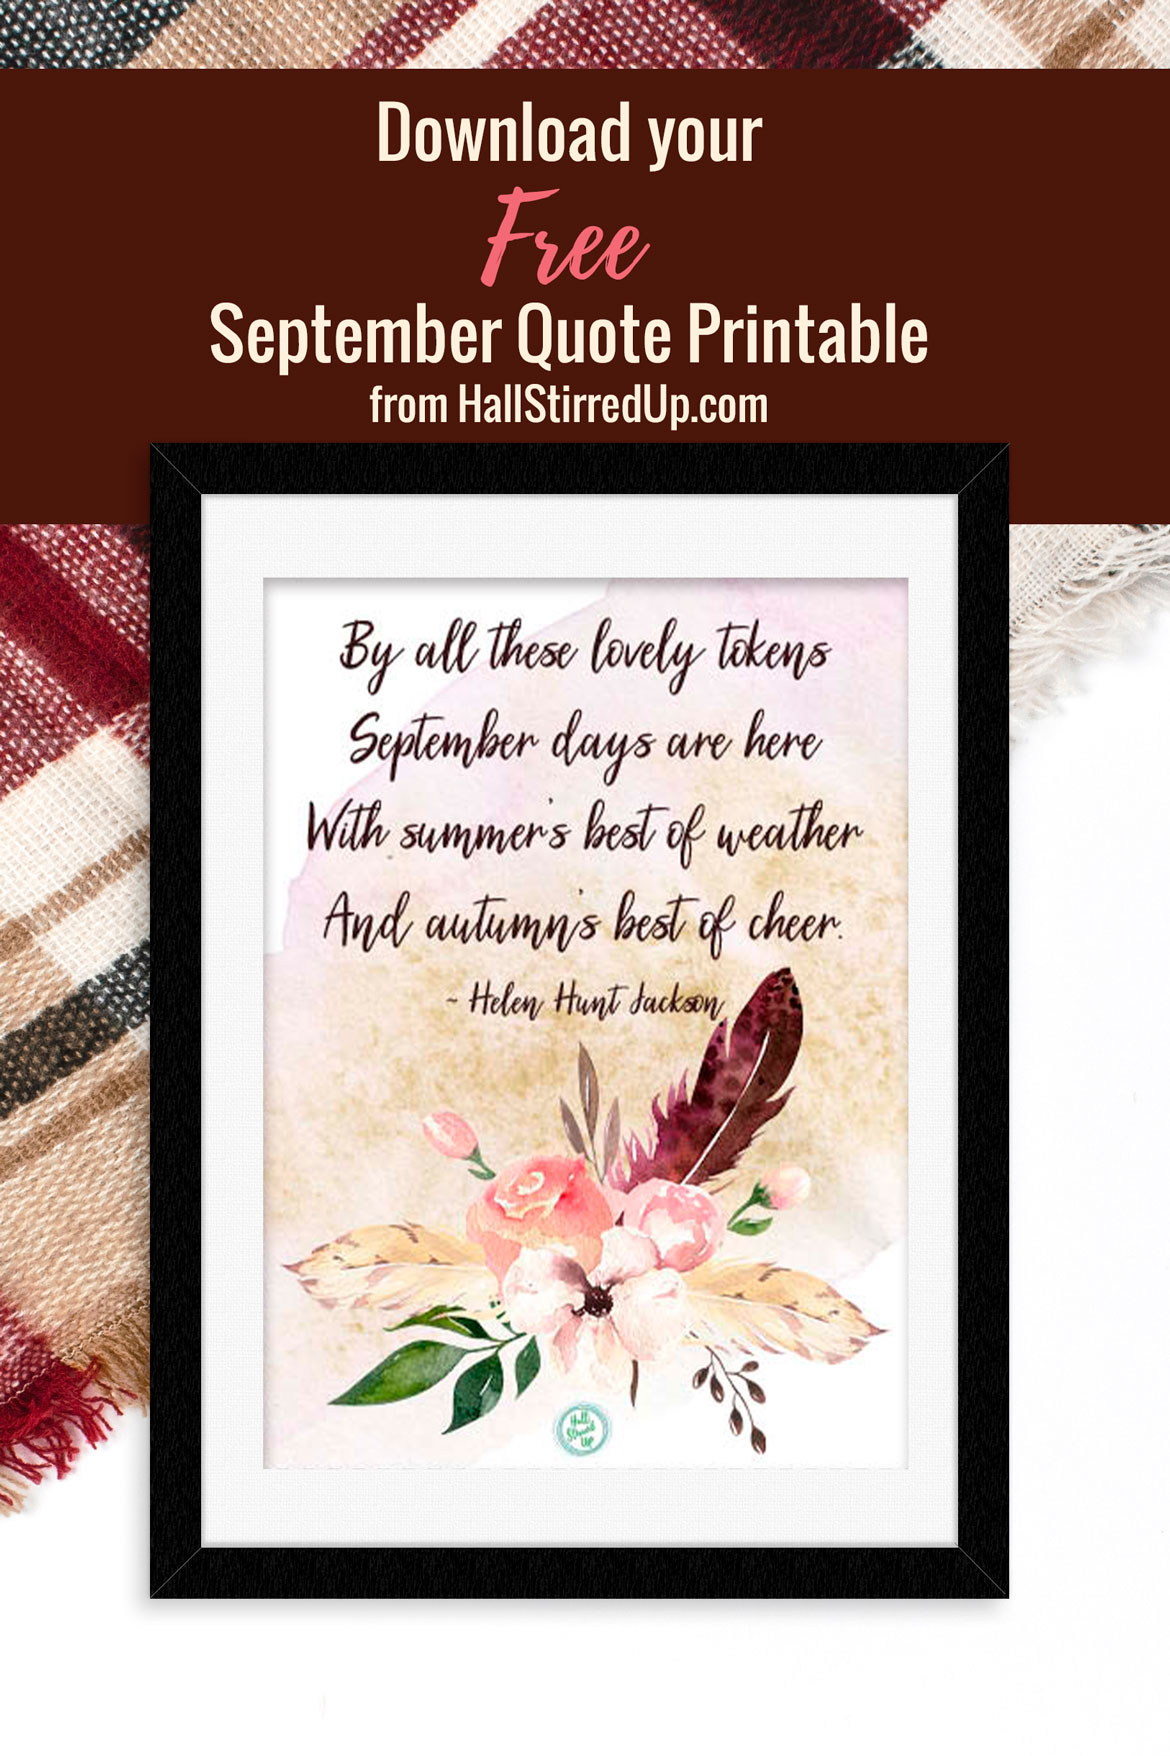 It's time for a new September Days quote printable